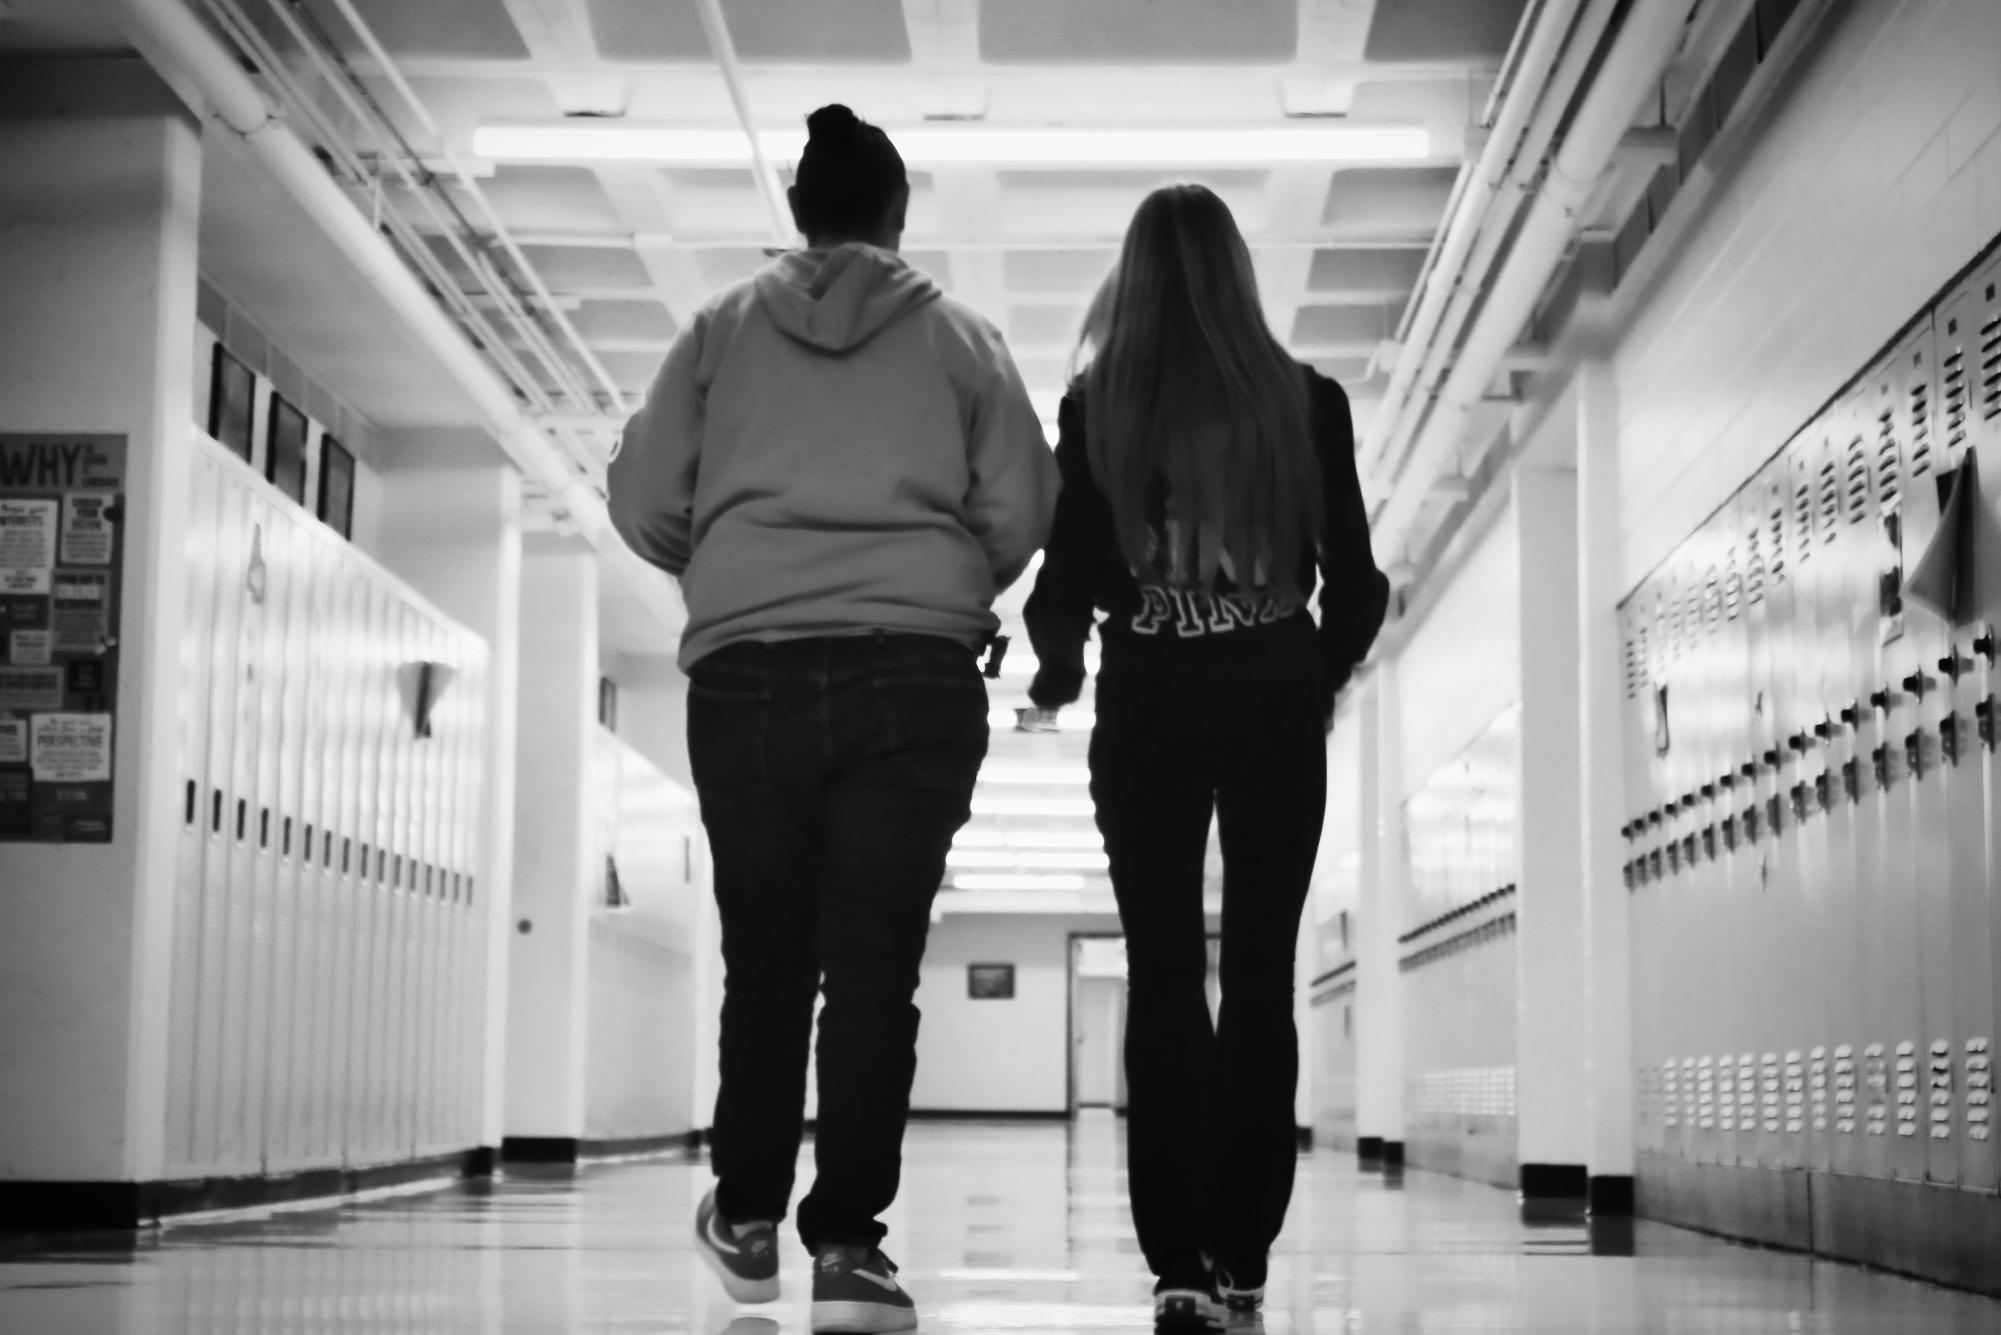 A student may walk through the halls of MCHS never knowing that the person walking past them is a victim of sexual assault — but those victims need to know they aren’t alone.